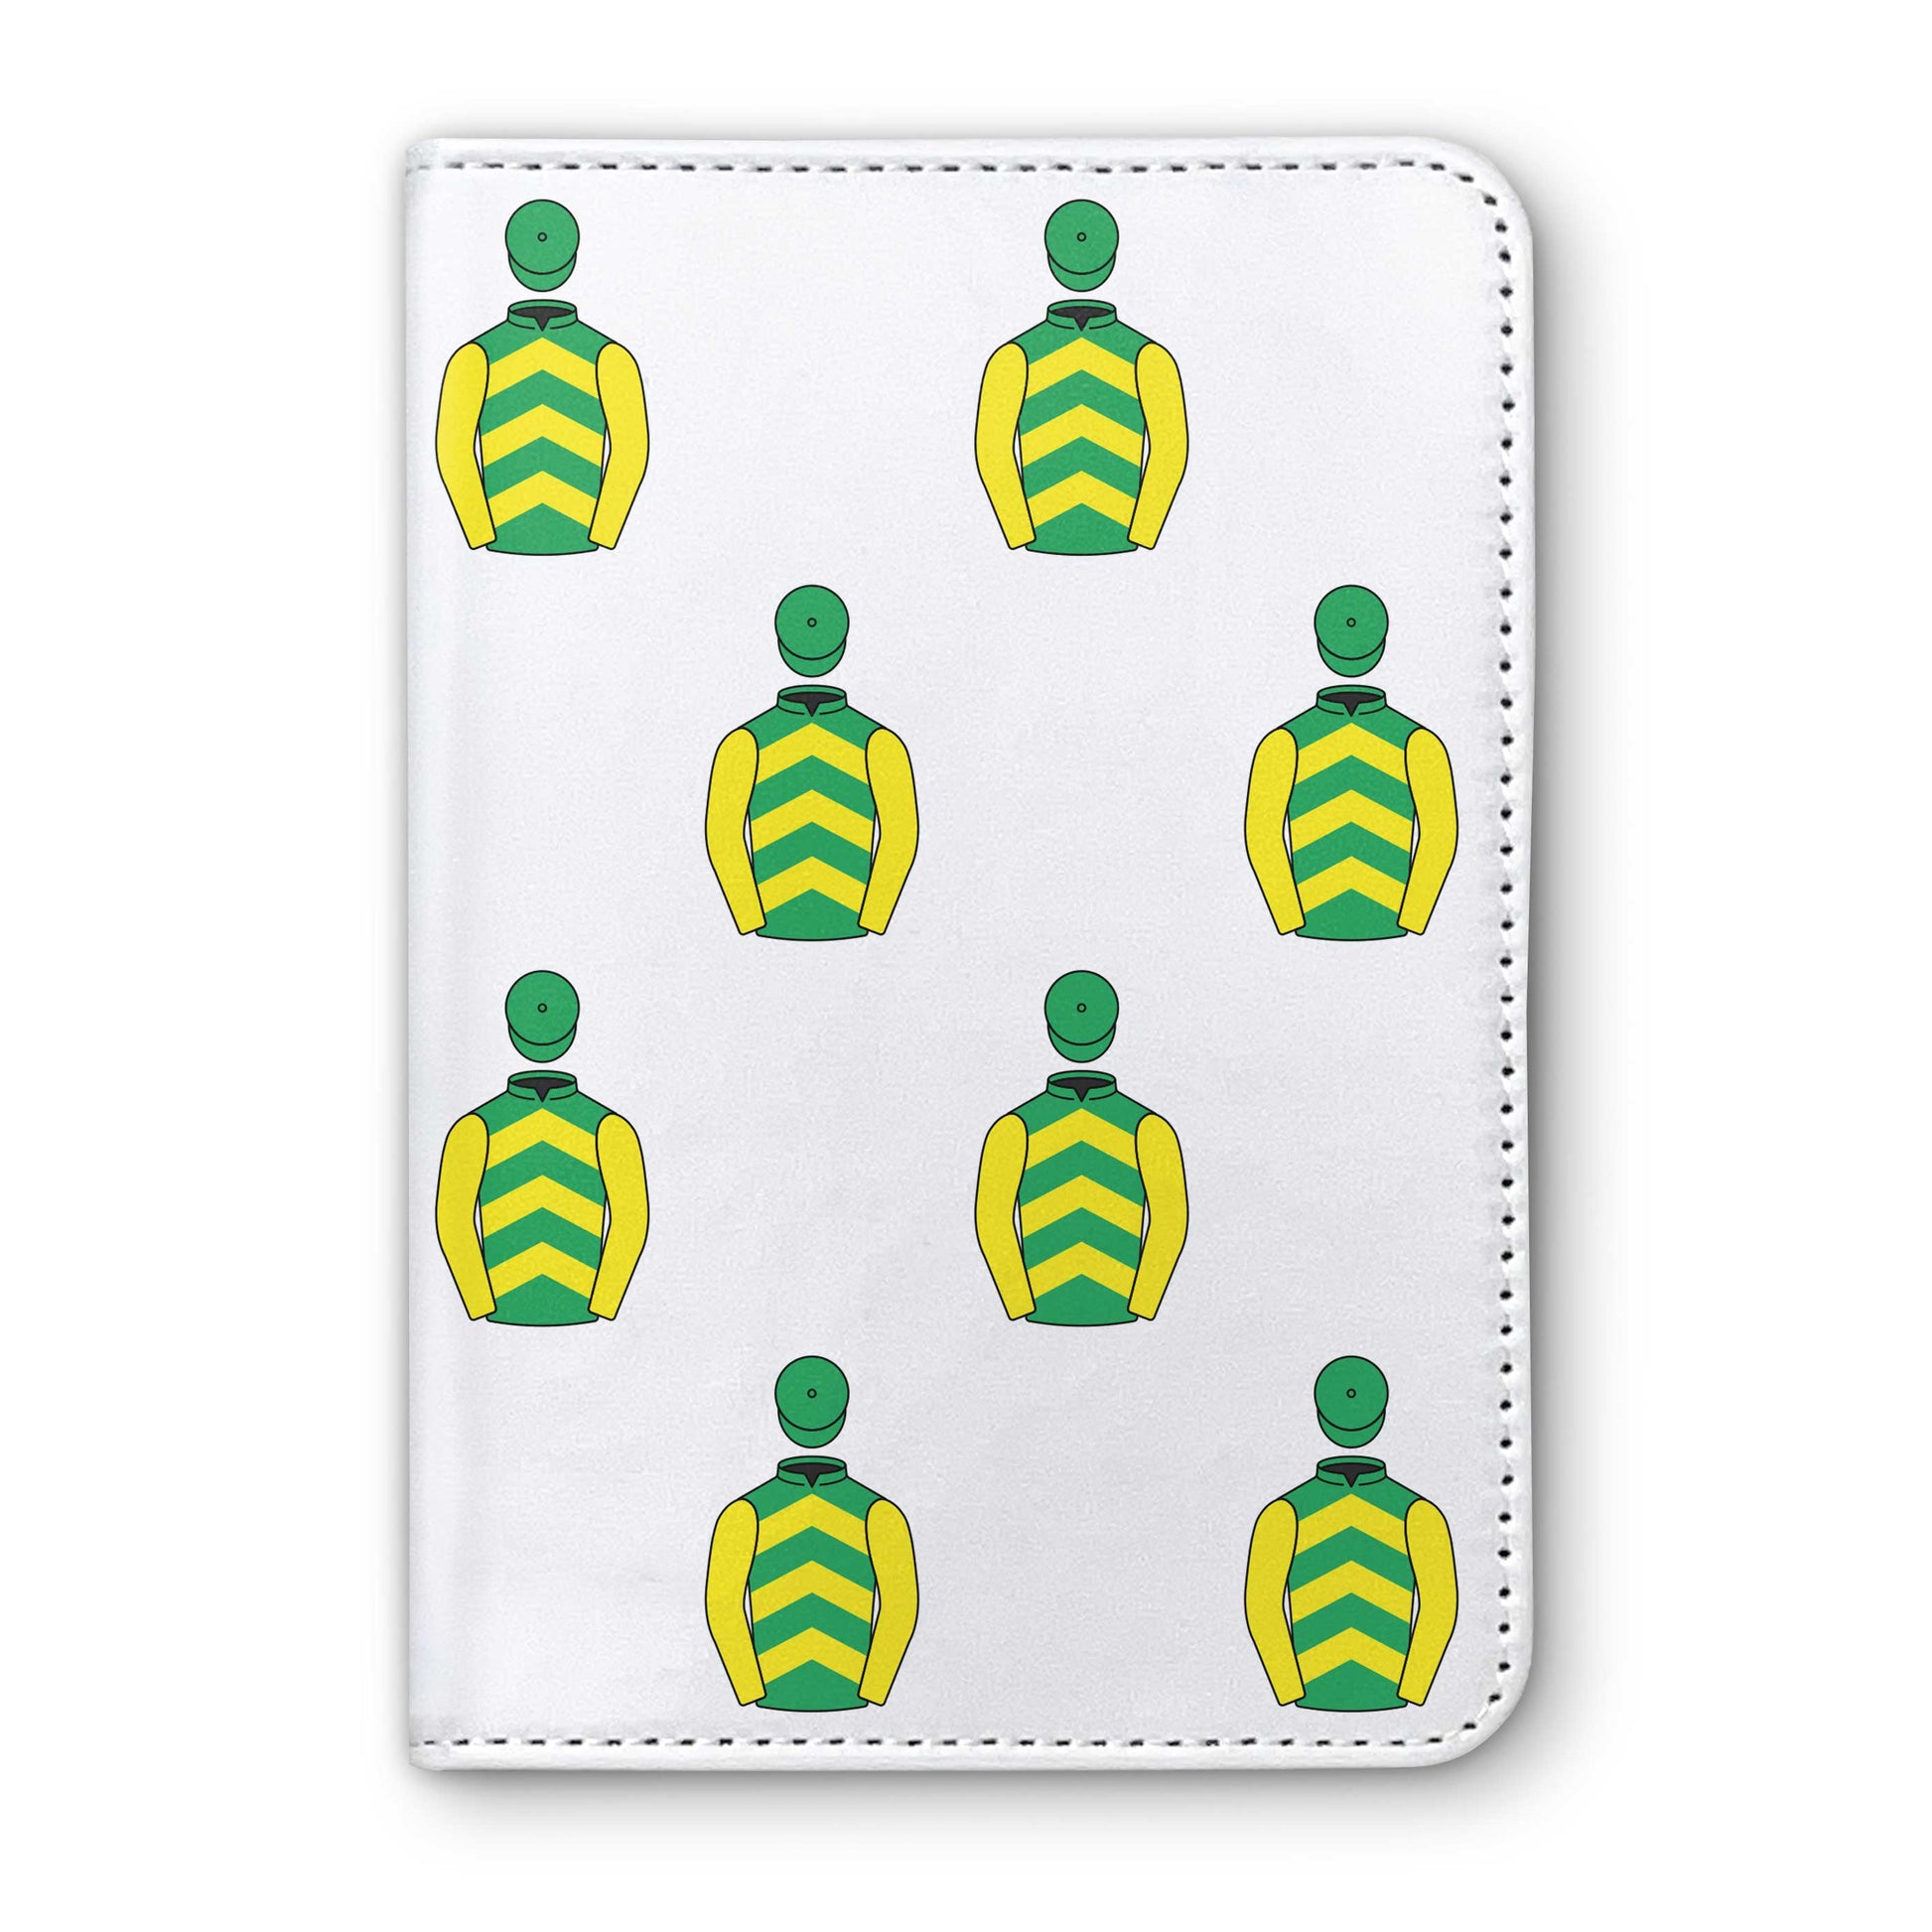 Watch This Space Syndicate Horse Racing Passport Holder - Hacked Up Horse Racing Gifts